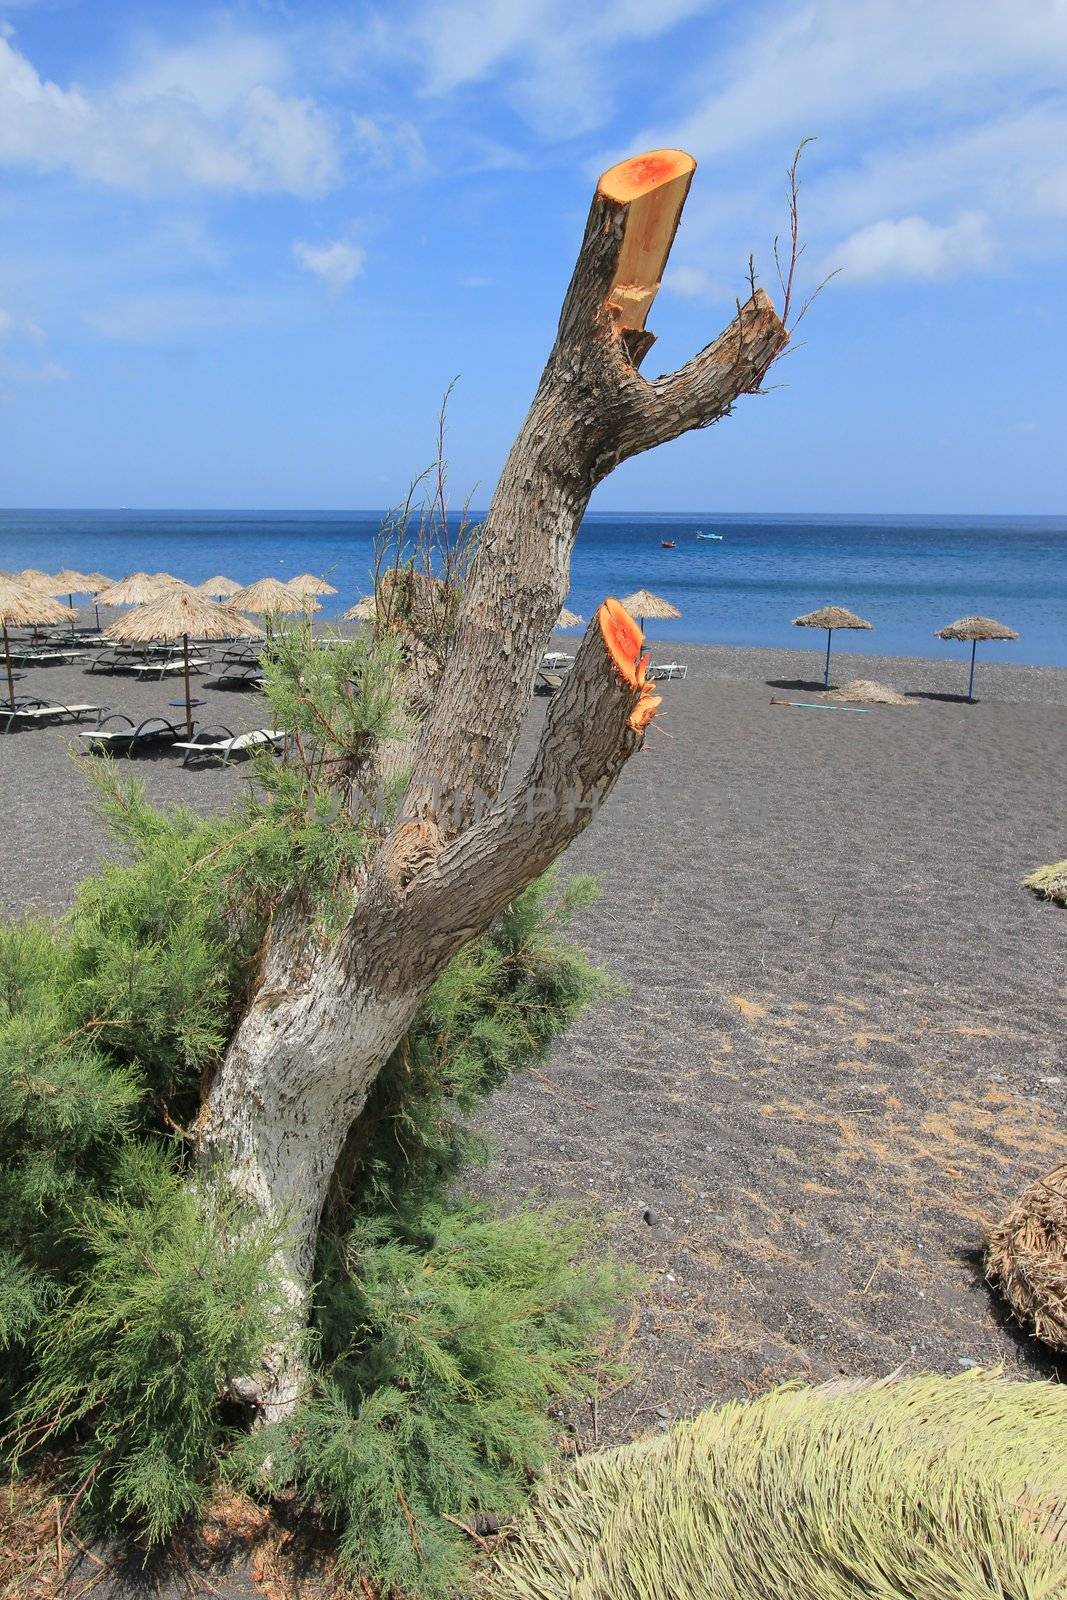 Dead trunk at black beach with umbrellas made of straw and colorful deckchairs at Kamari, Santorini, Greece, by beautiful weather.